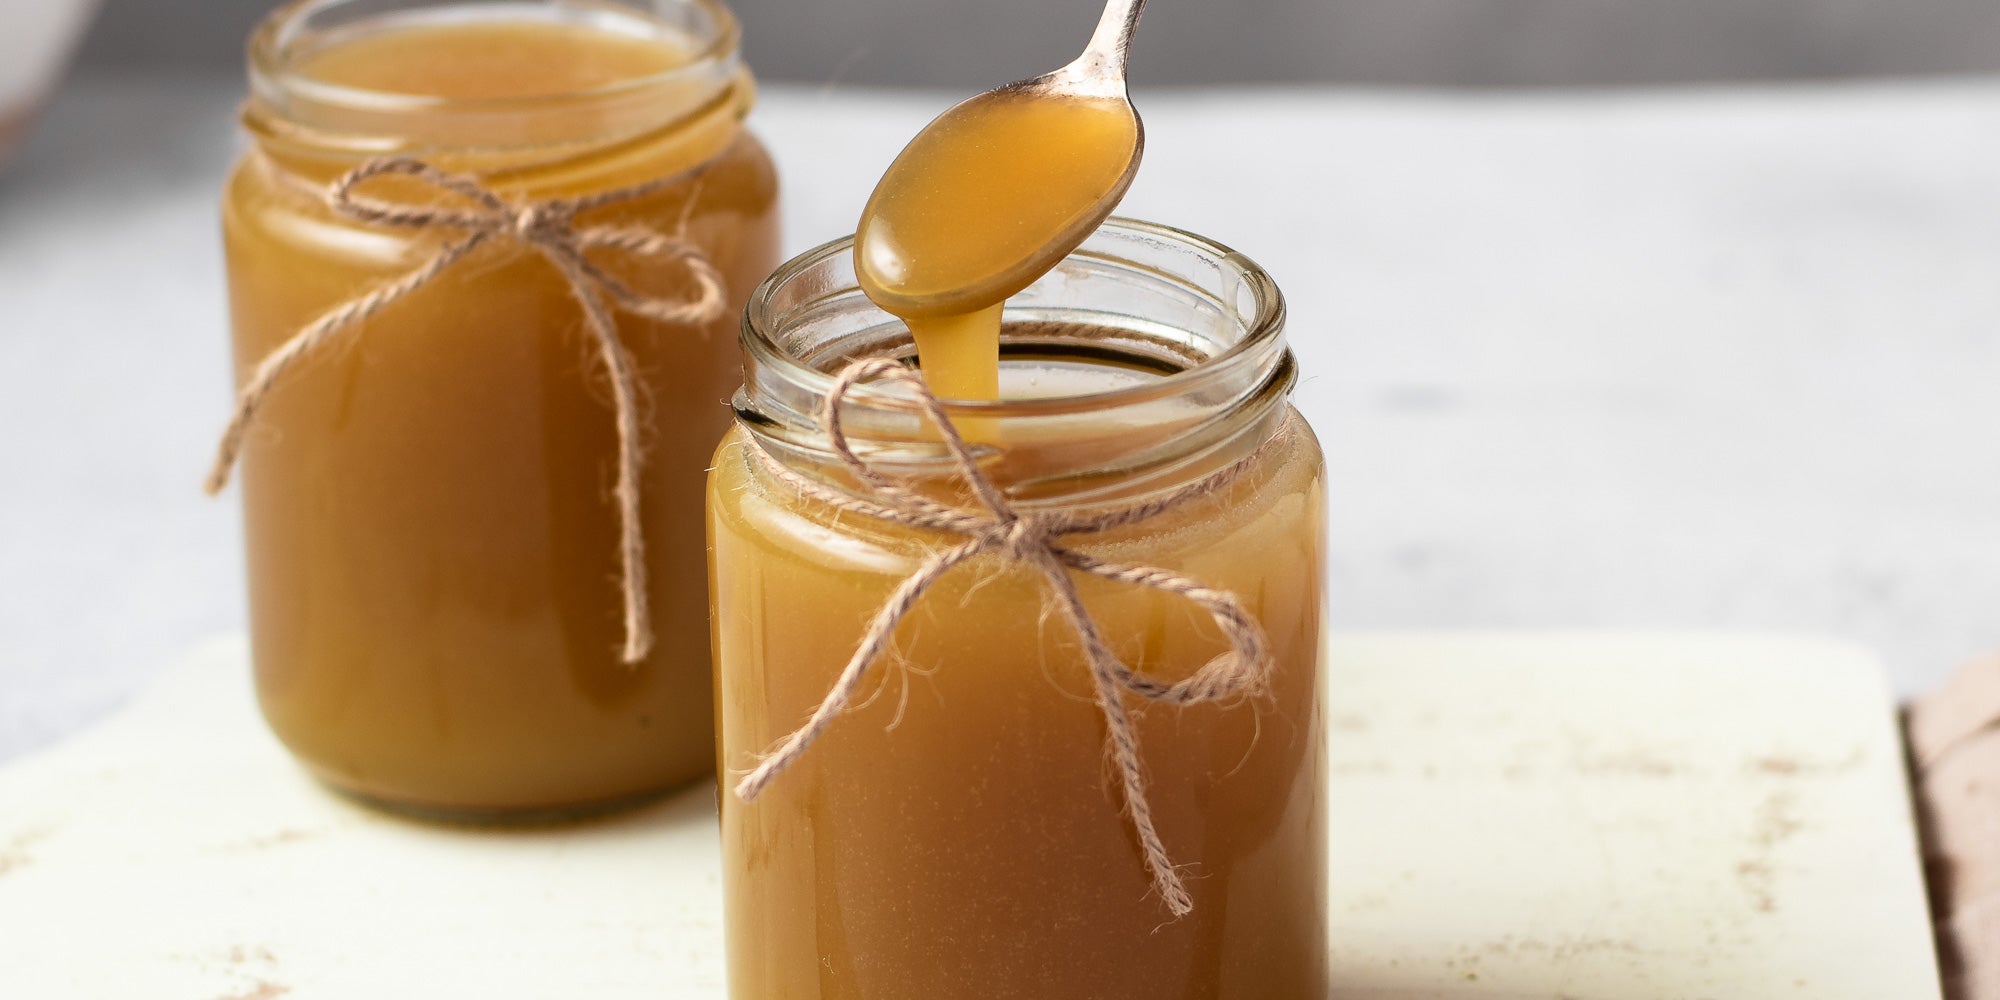 Toffee Sauce poured into a jar